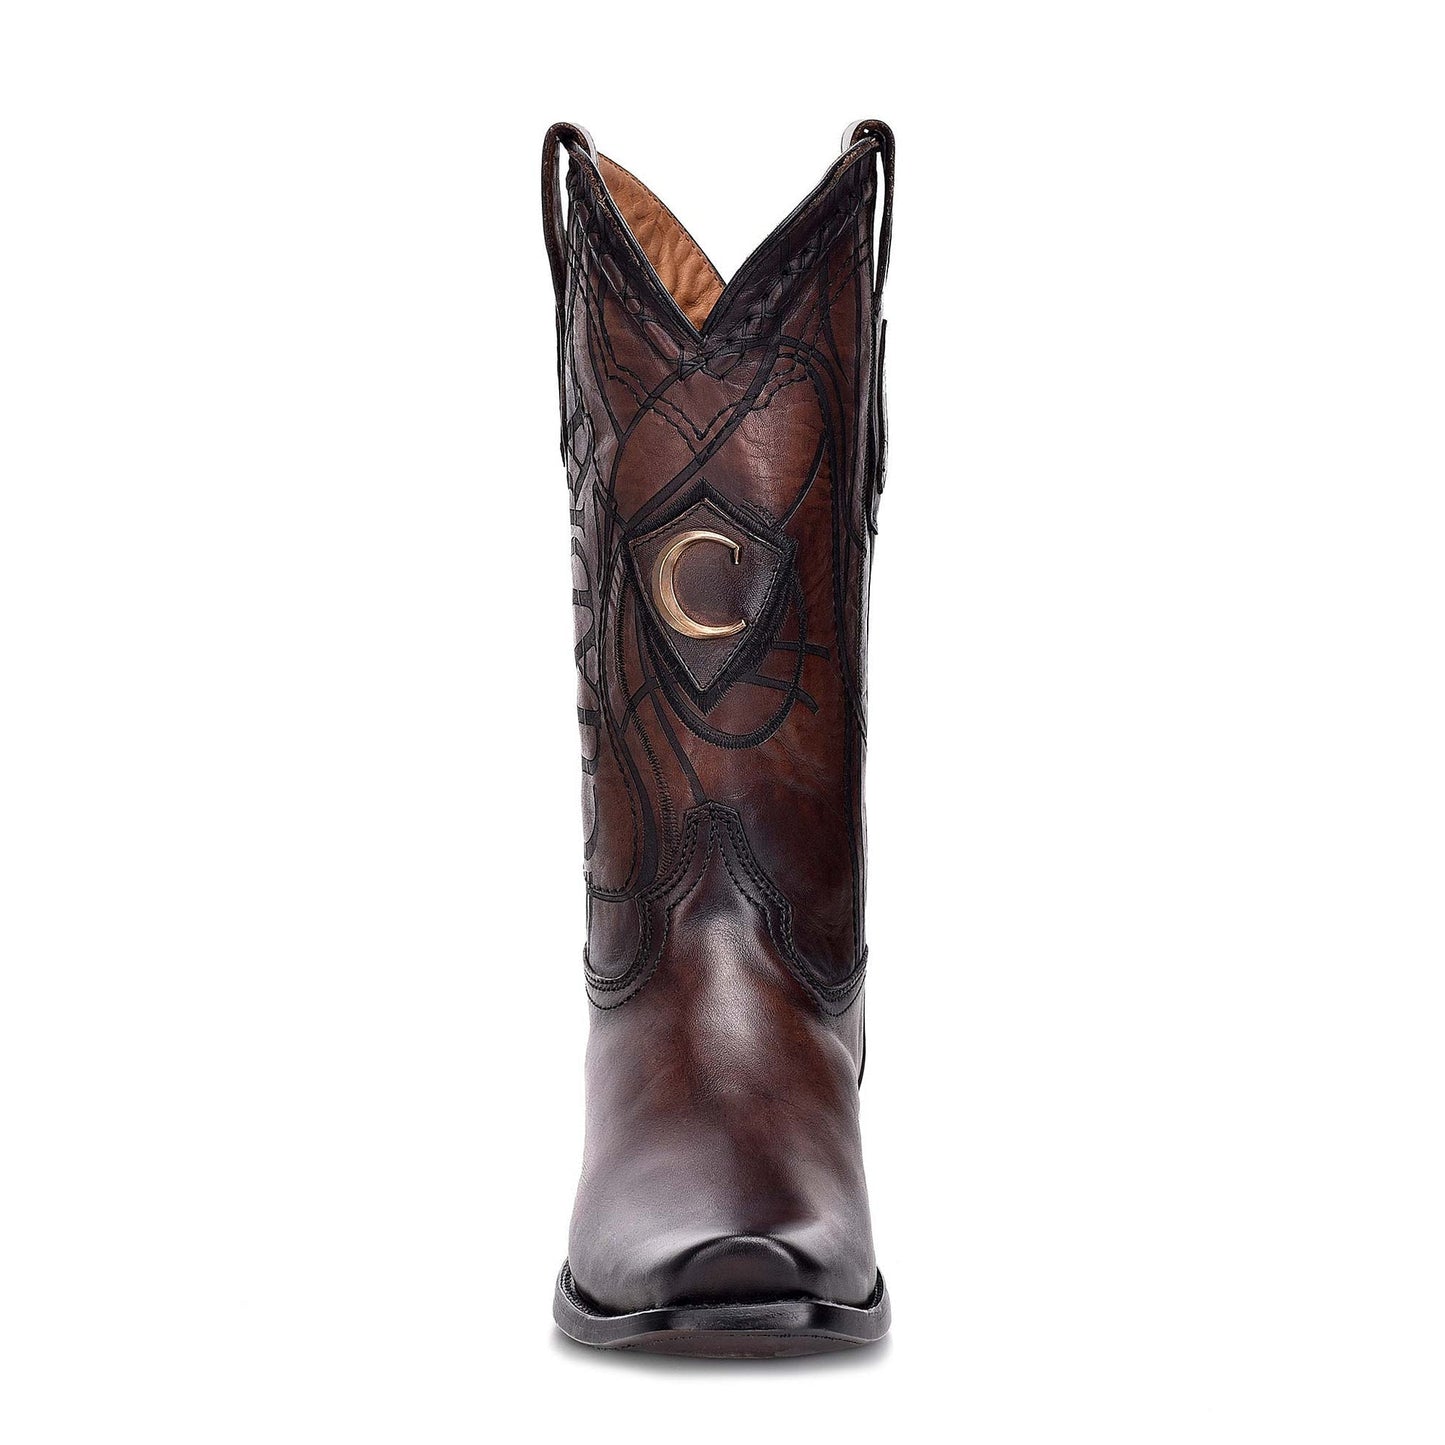 1J1NRS - Cuadra brown western cowboy cowhide leather boots for men-Kuet.us